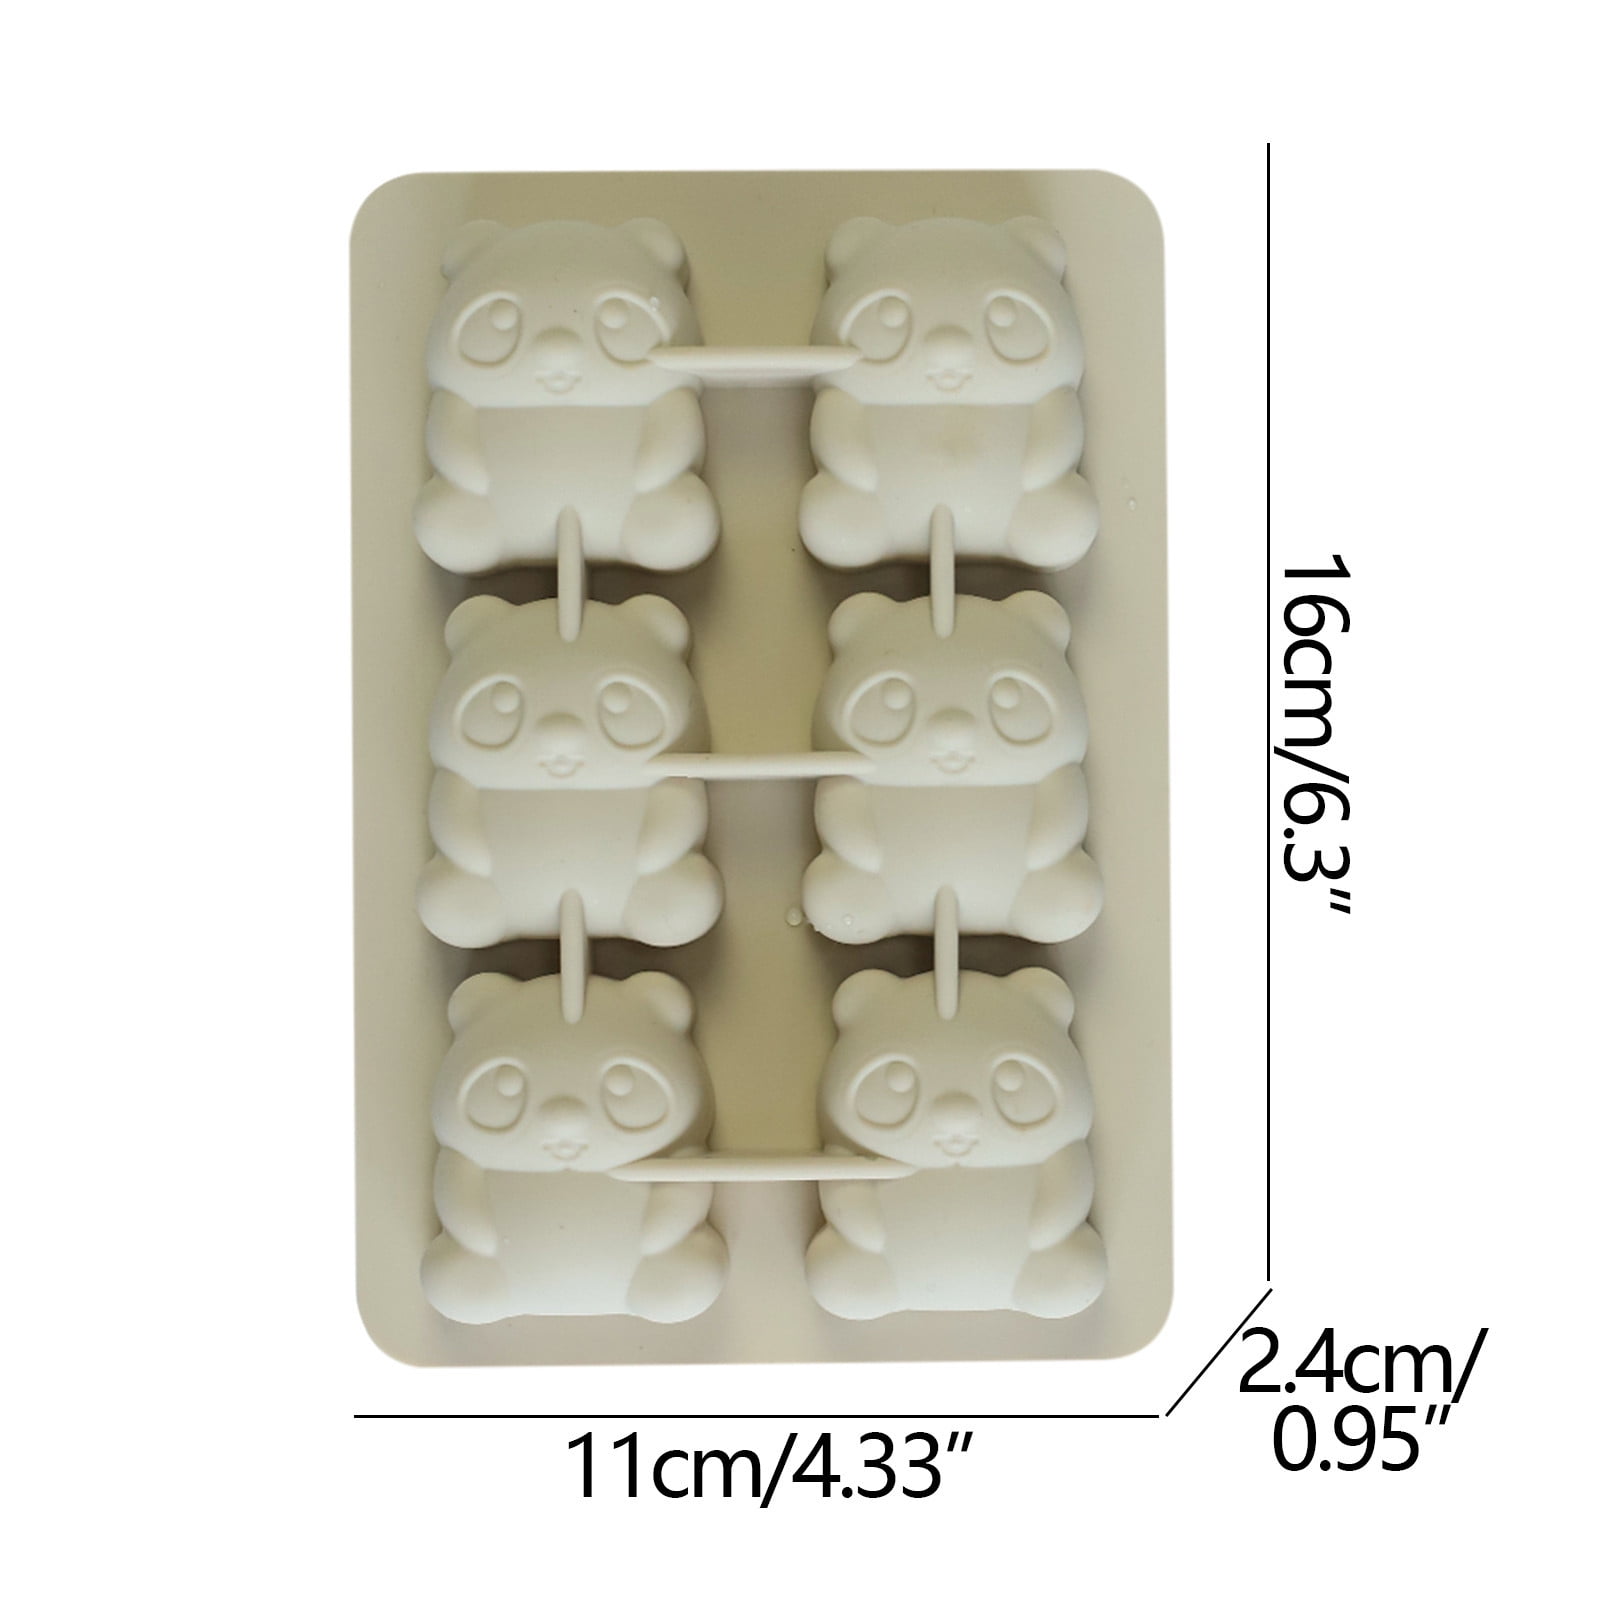 Numbers 1234567890 Silicone Mold Candy Wax Soap Fat Bombs Chocolate Ice 8  x 4